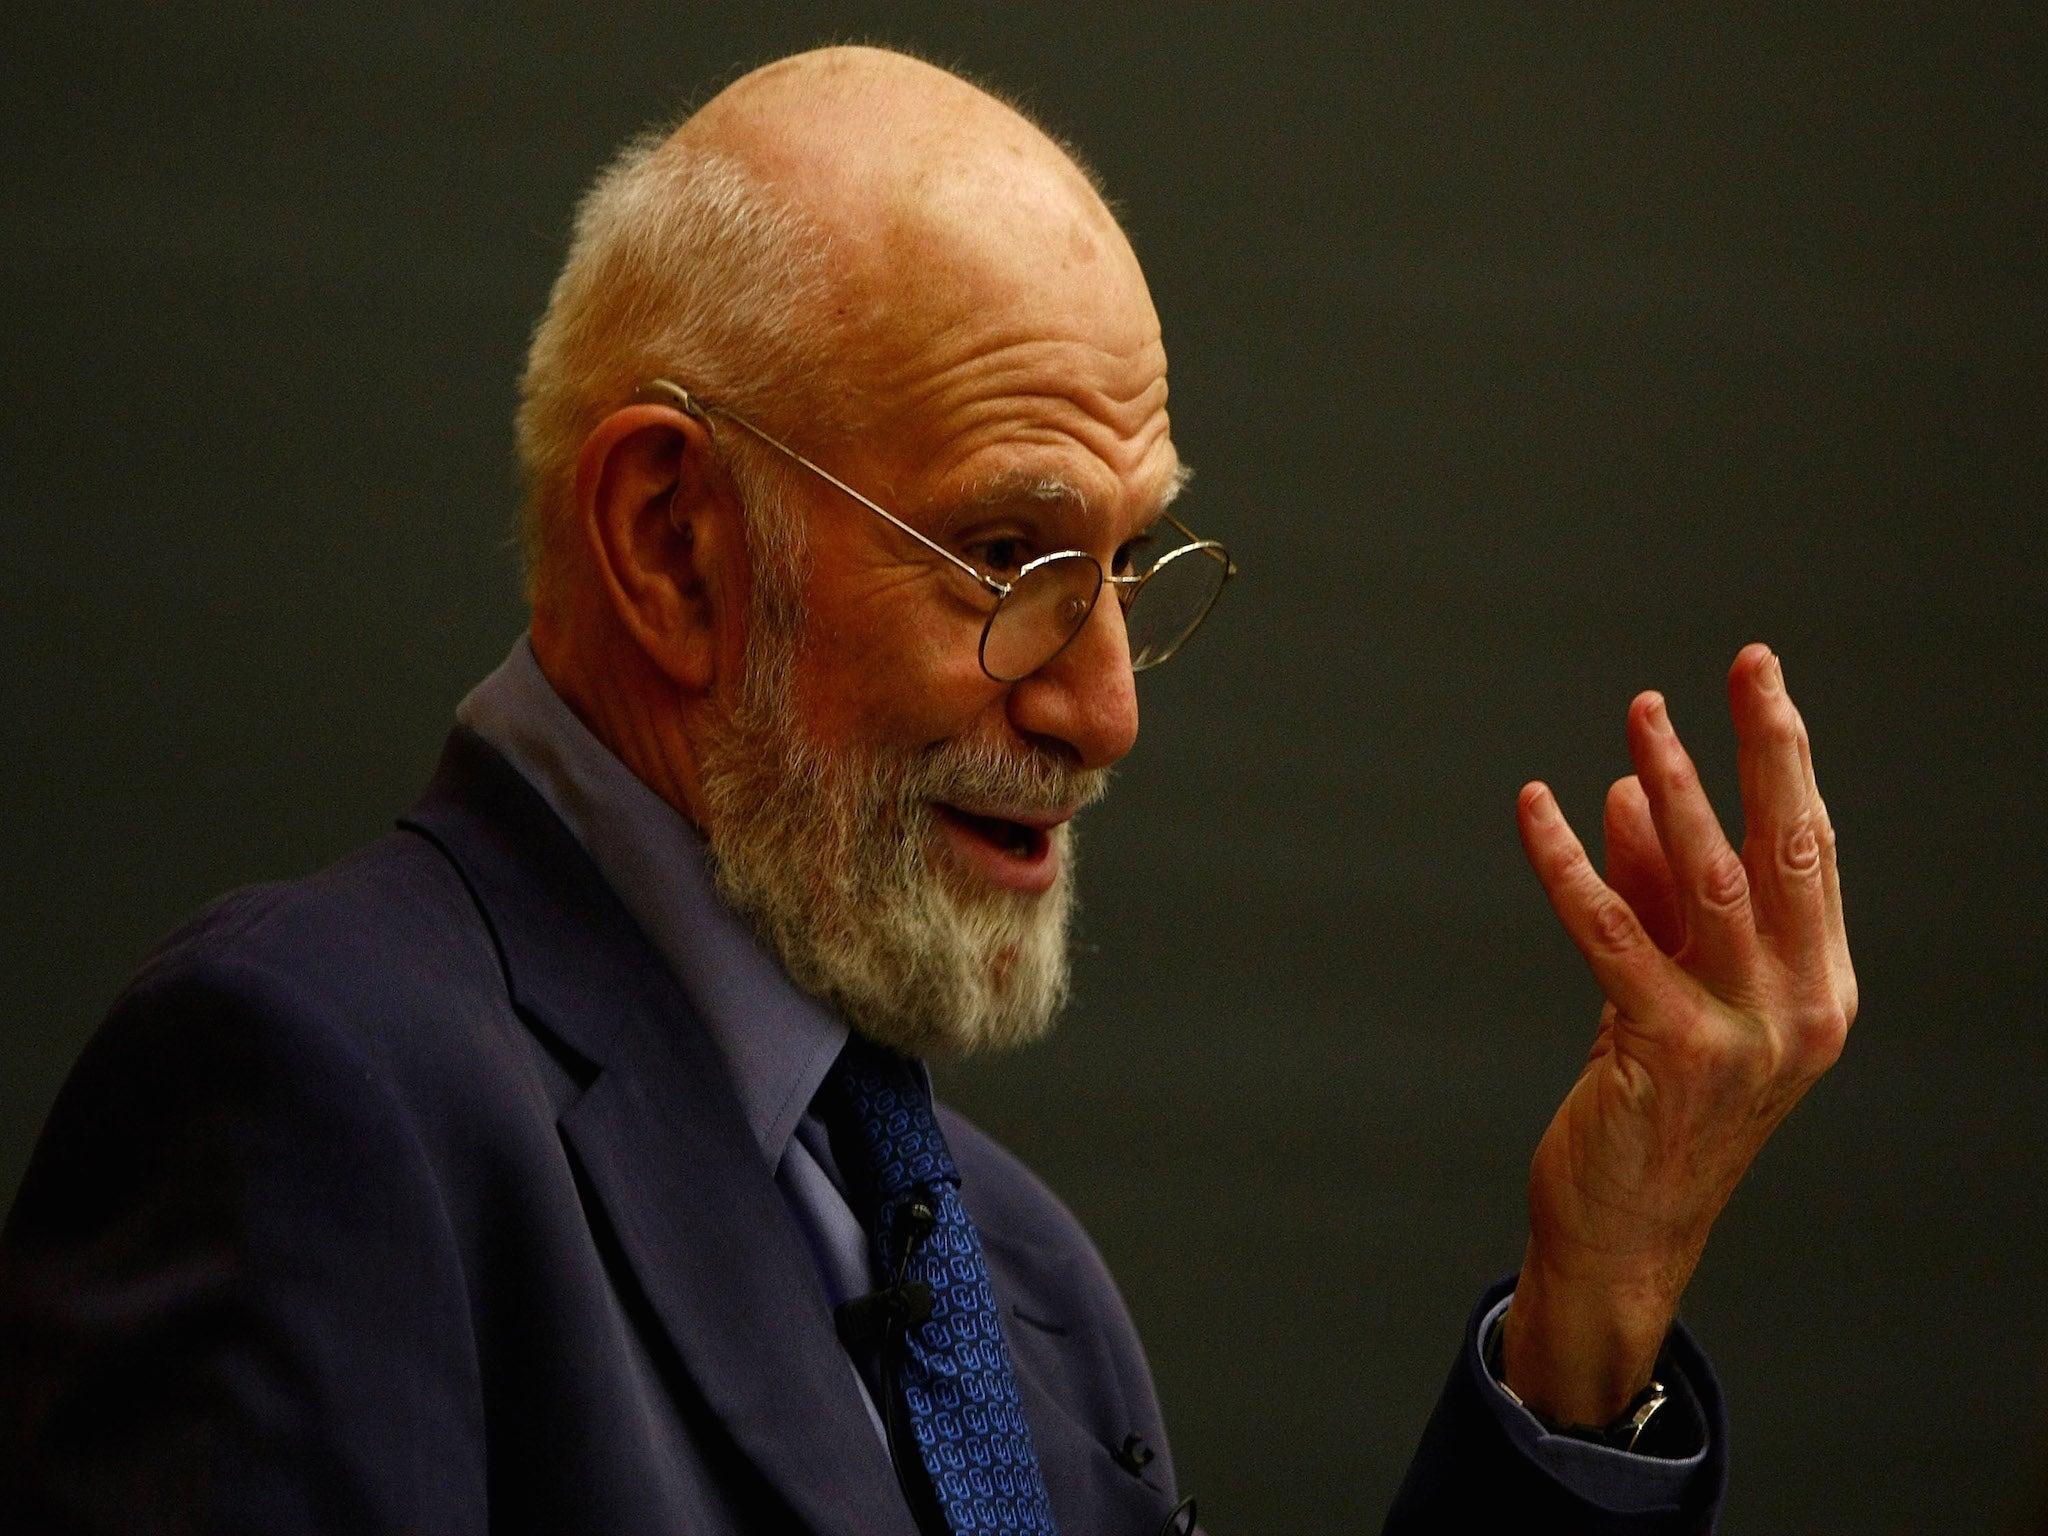 Oliver Sacks revealed he had terminal cancer in an article in the New York Times